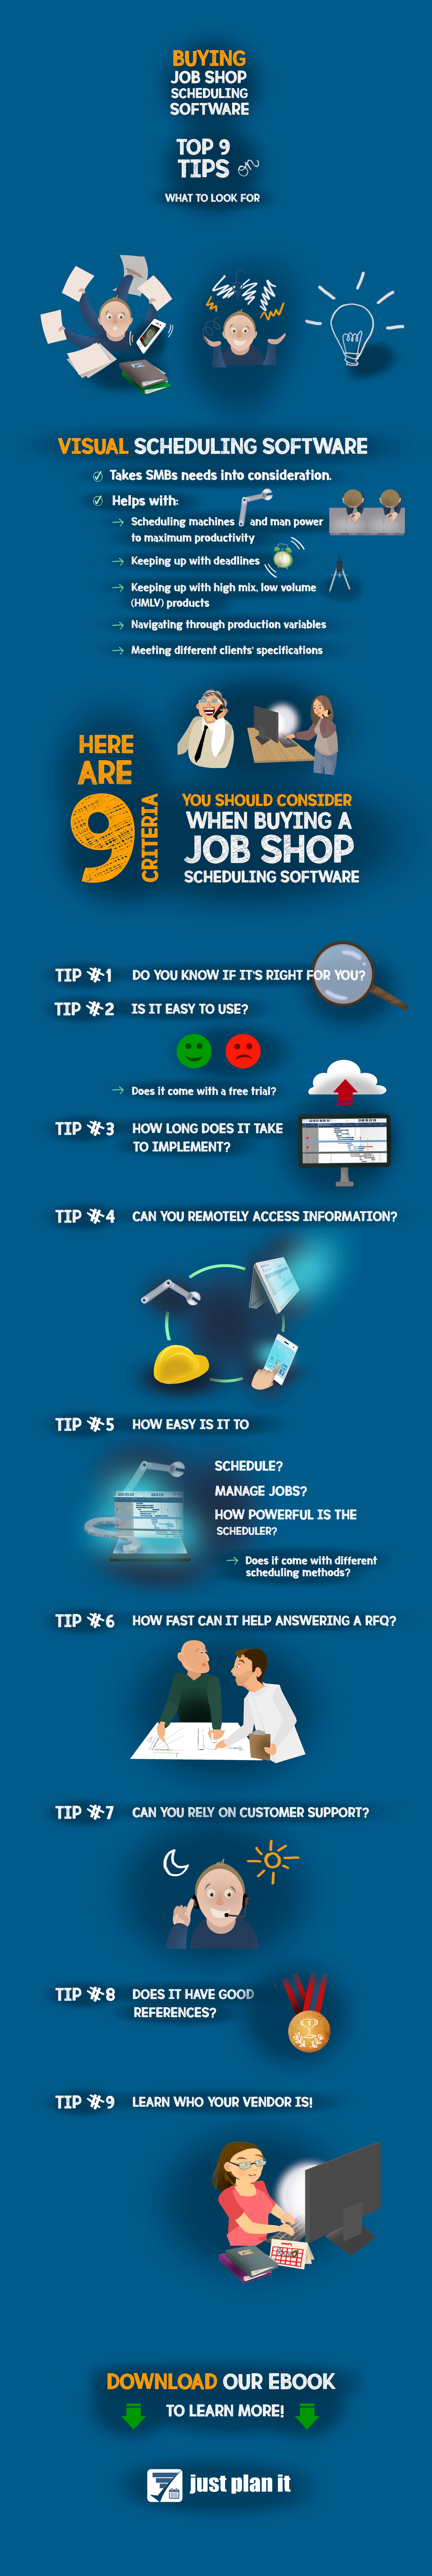 eBook infographic corrected